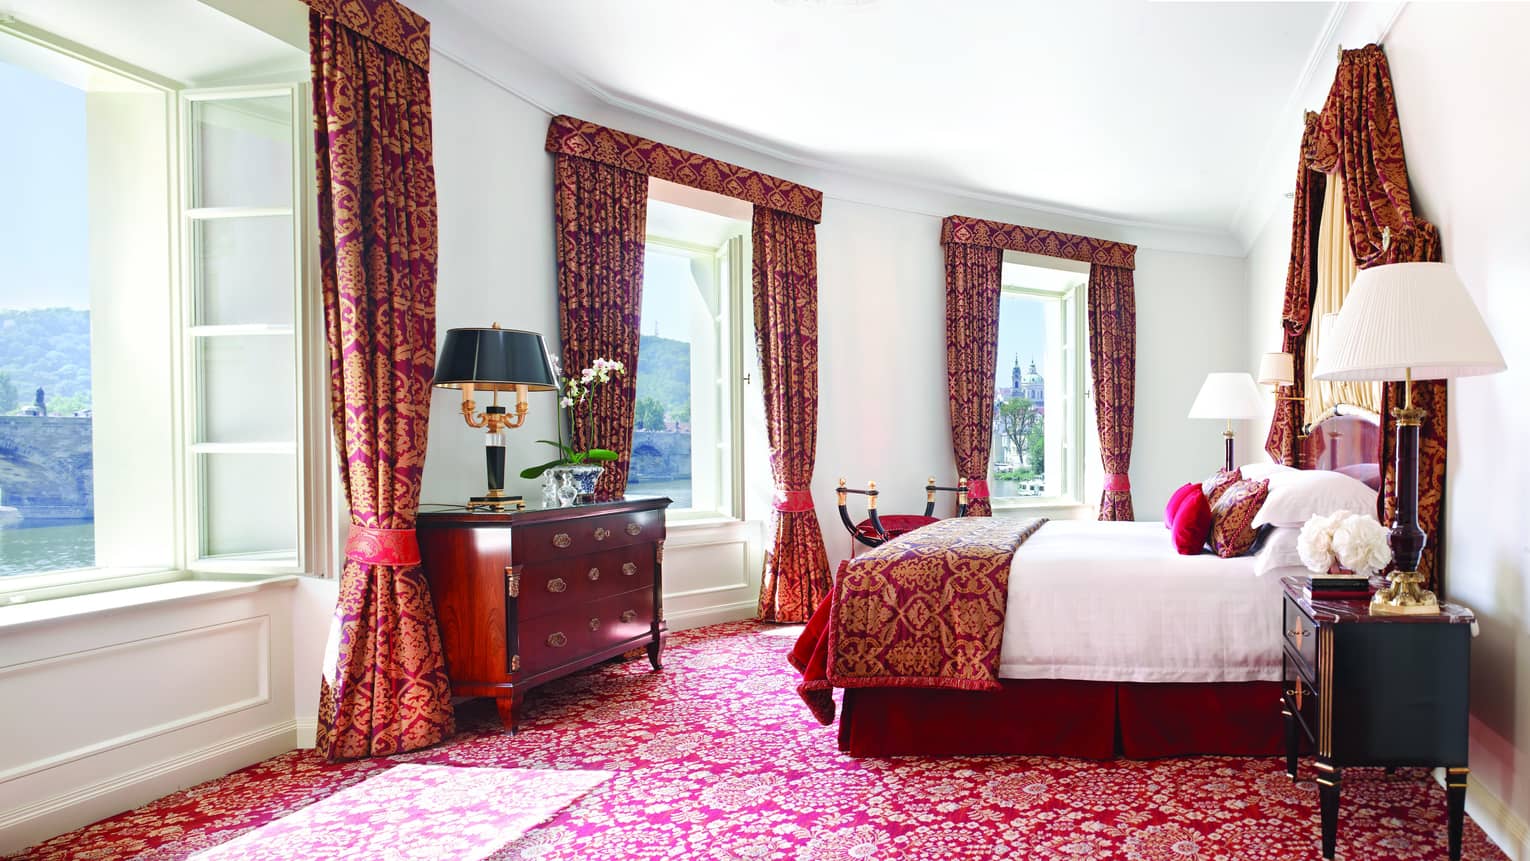 Presidential Suite with bright windows along curved wall, Baroque-inspired red-and-gold carpet, curtains